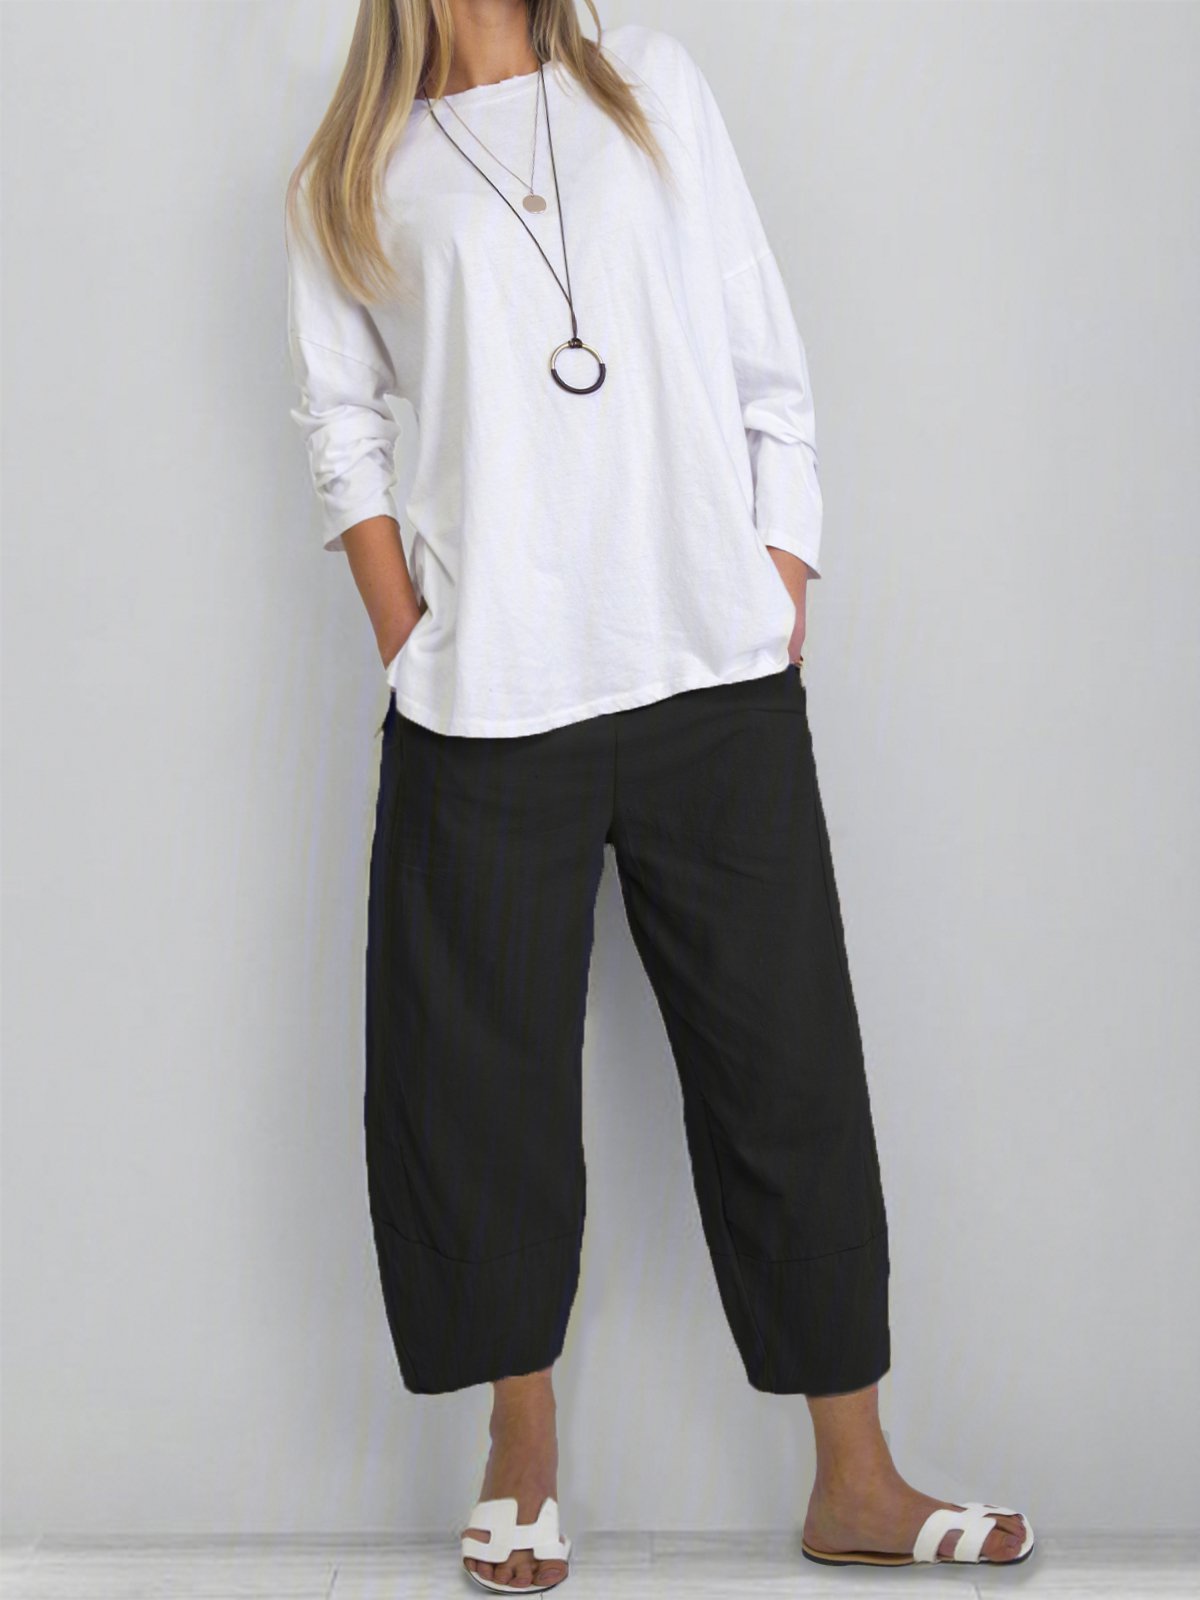 Women's Linen Pants Chinos Pants Trousers Ankle-Length Cotton Side Pockets Baggy Mid Waist Fashion Casual Weekend